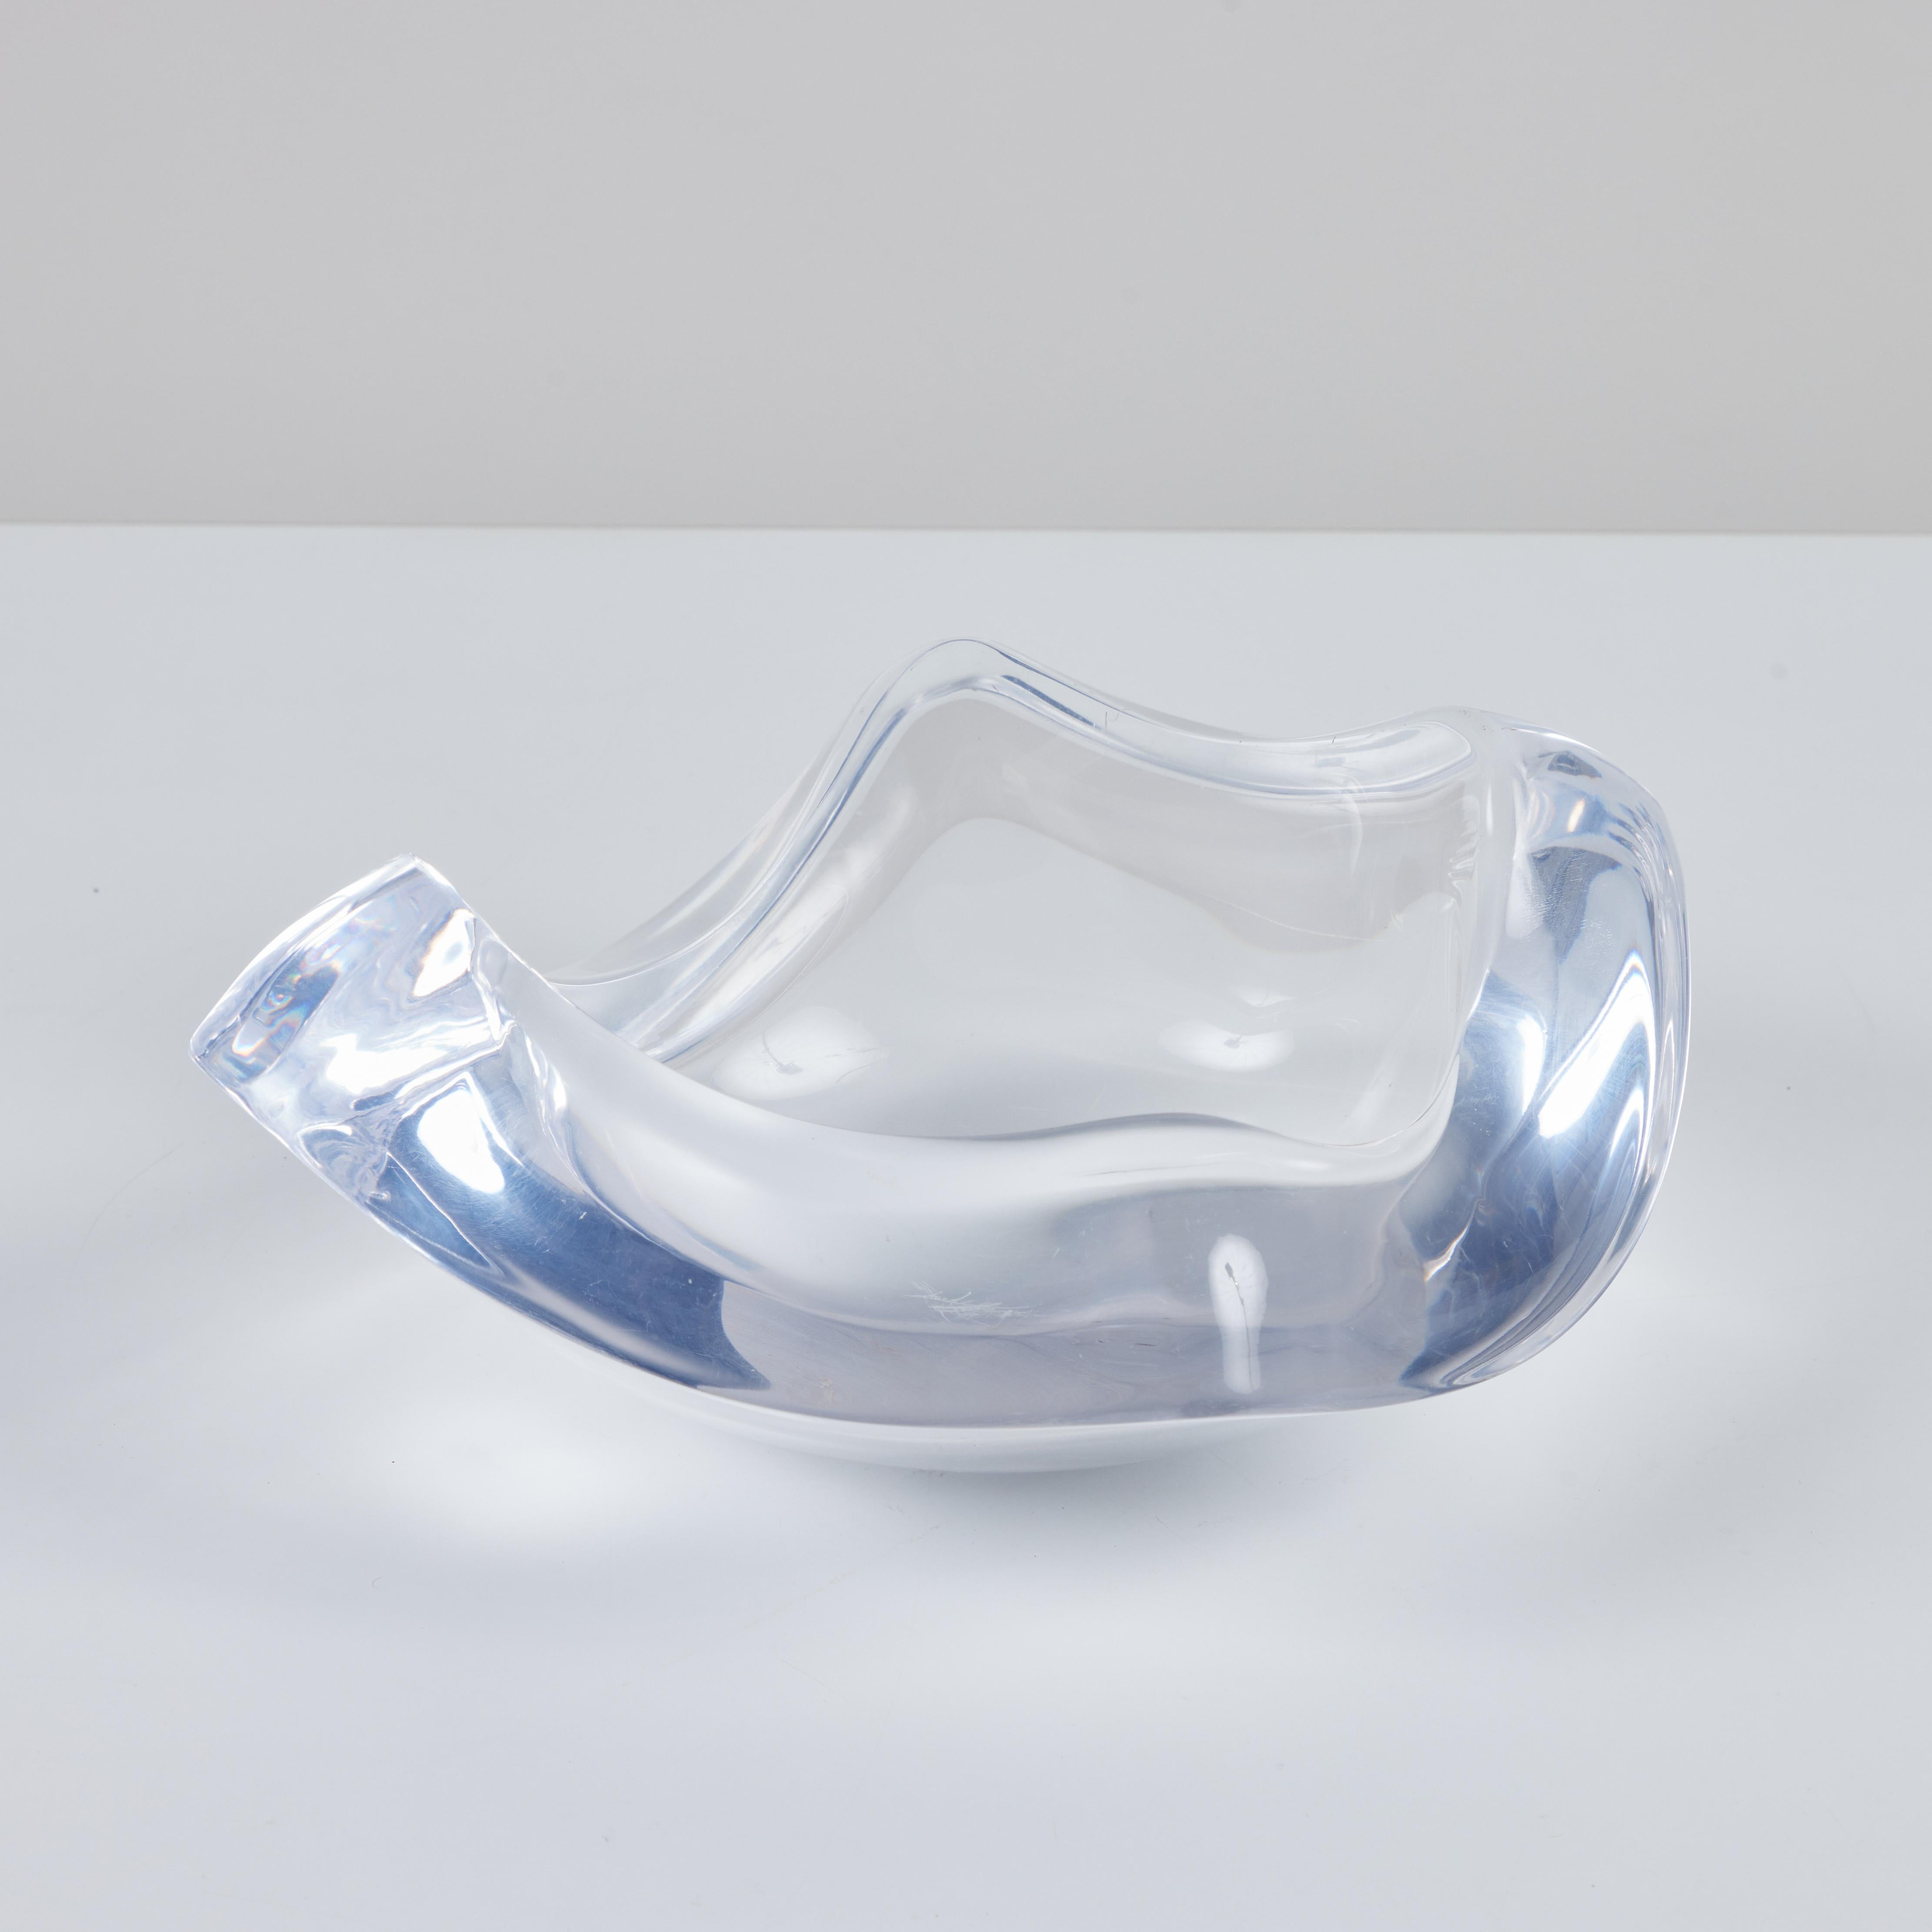 Late 20th Century Thick Edge Astrolite Lucite Bowl by Ritts Co.